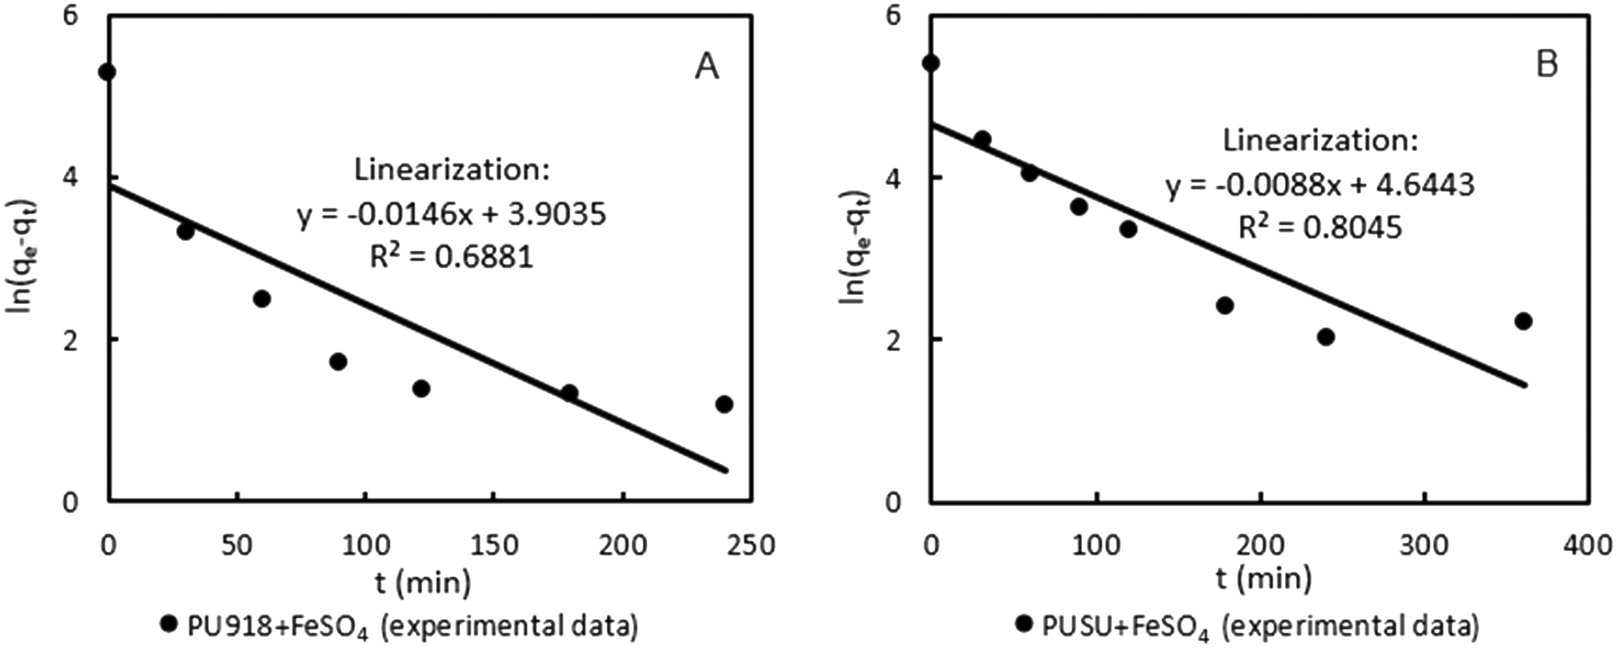 Effect of polyurethane structure on arsenic adsorption capacity in  nanofibrous polymer/ferrous sulphate-based systems - Environmental Science:  Water Research & Technology (RSC Publishing) DOI:10.1039/D2EW00566B